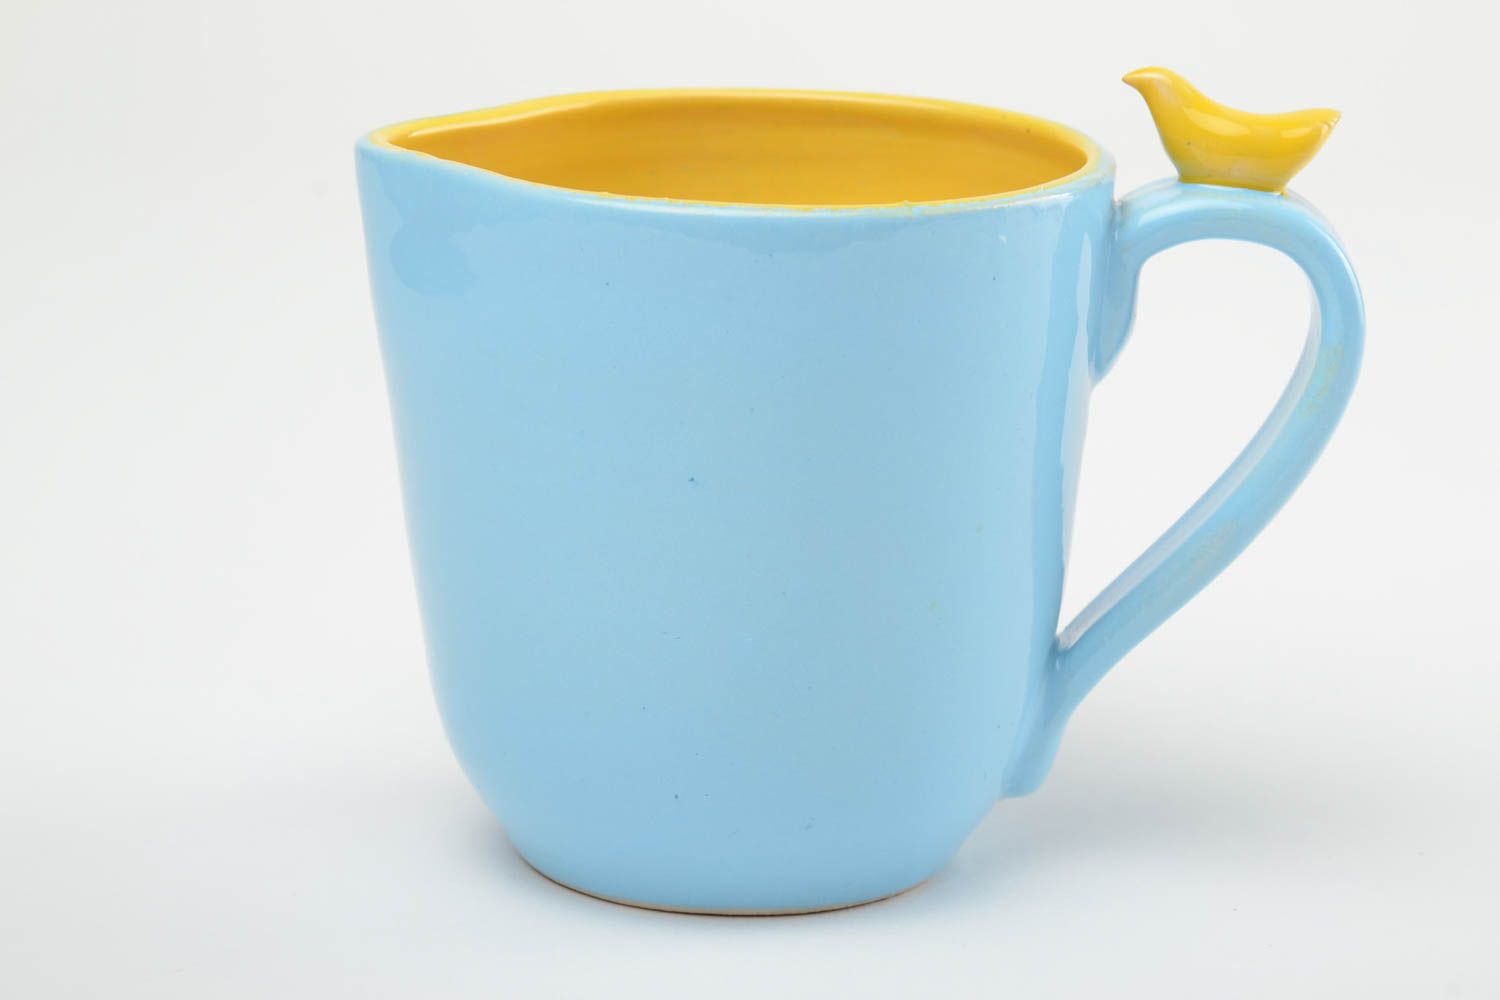 13 oz art ceramic cup in yellow and blue colors with handle photo 3